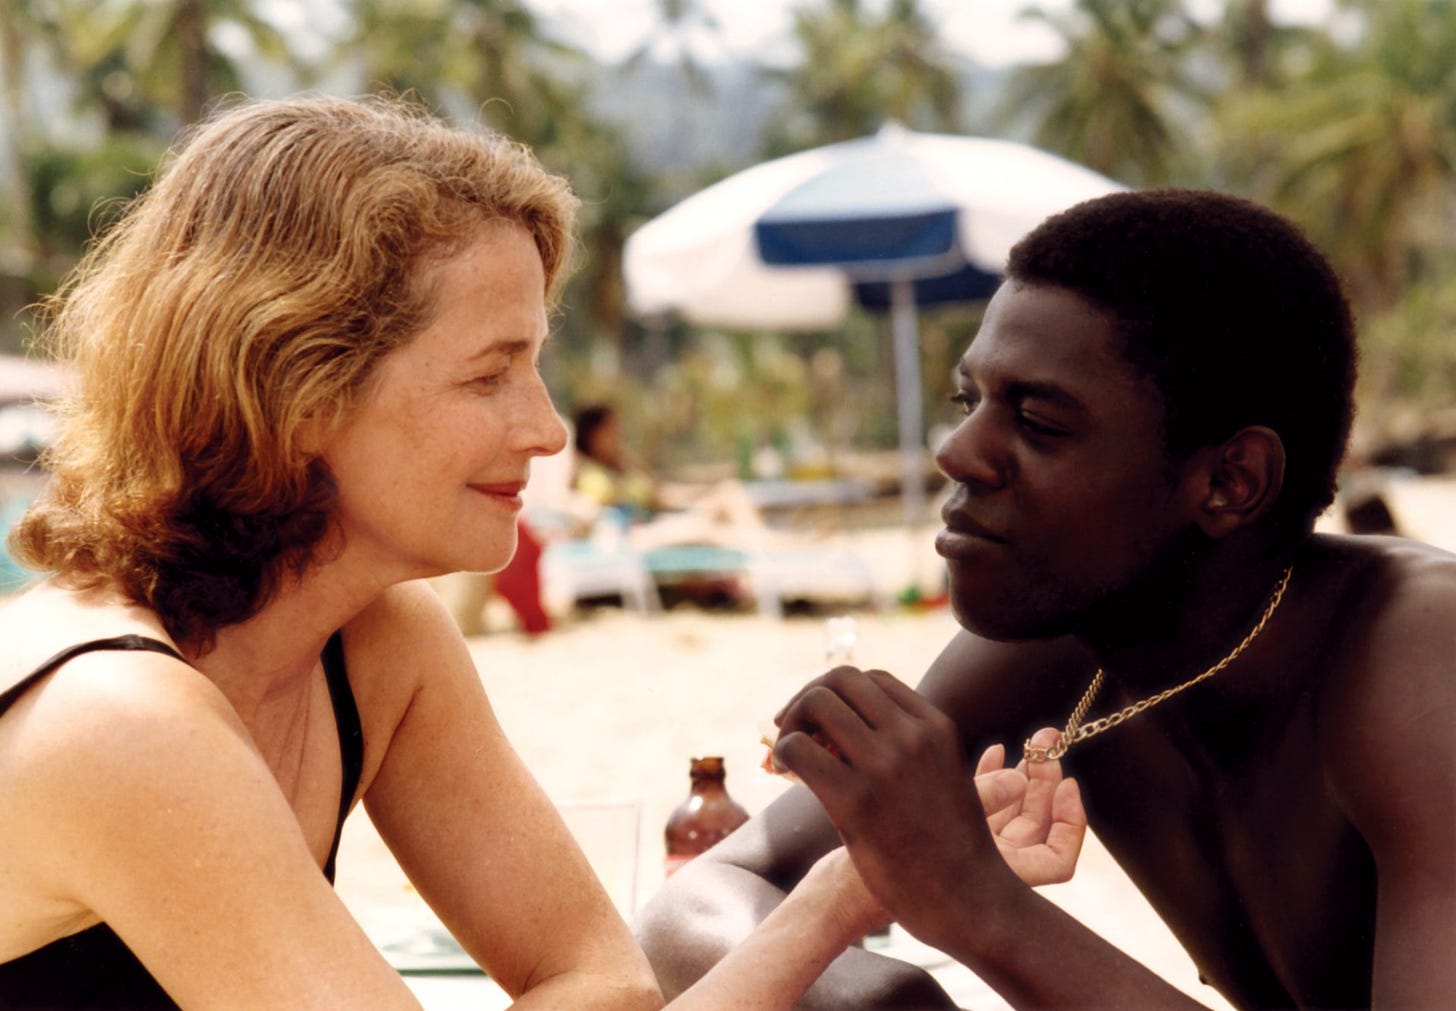 An older white woman leans closer to a younger Black man on a beach as she fondles a gold necklace around his neck